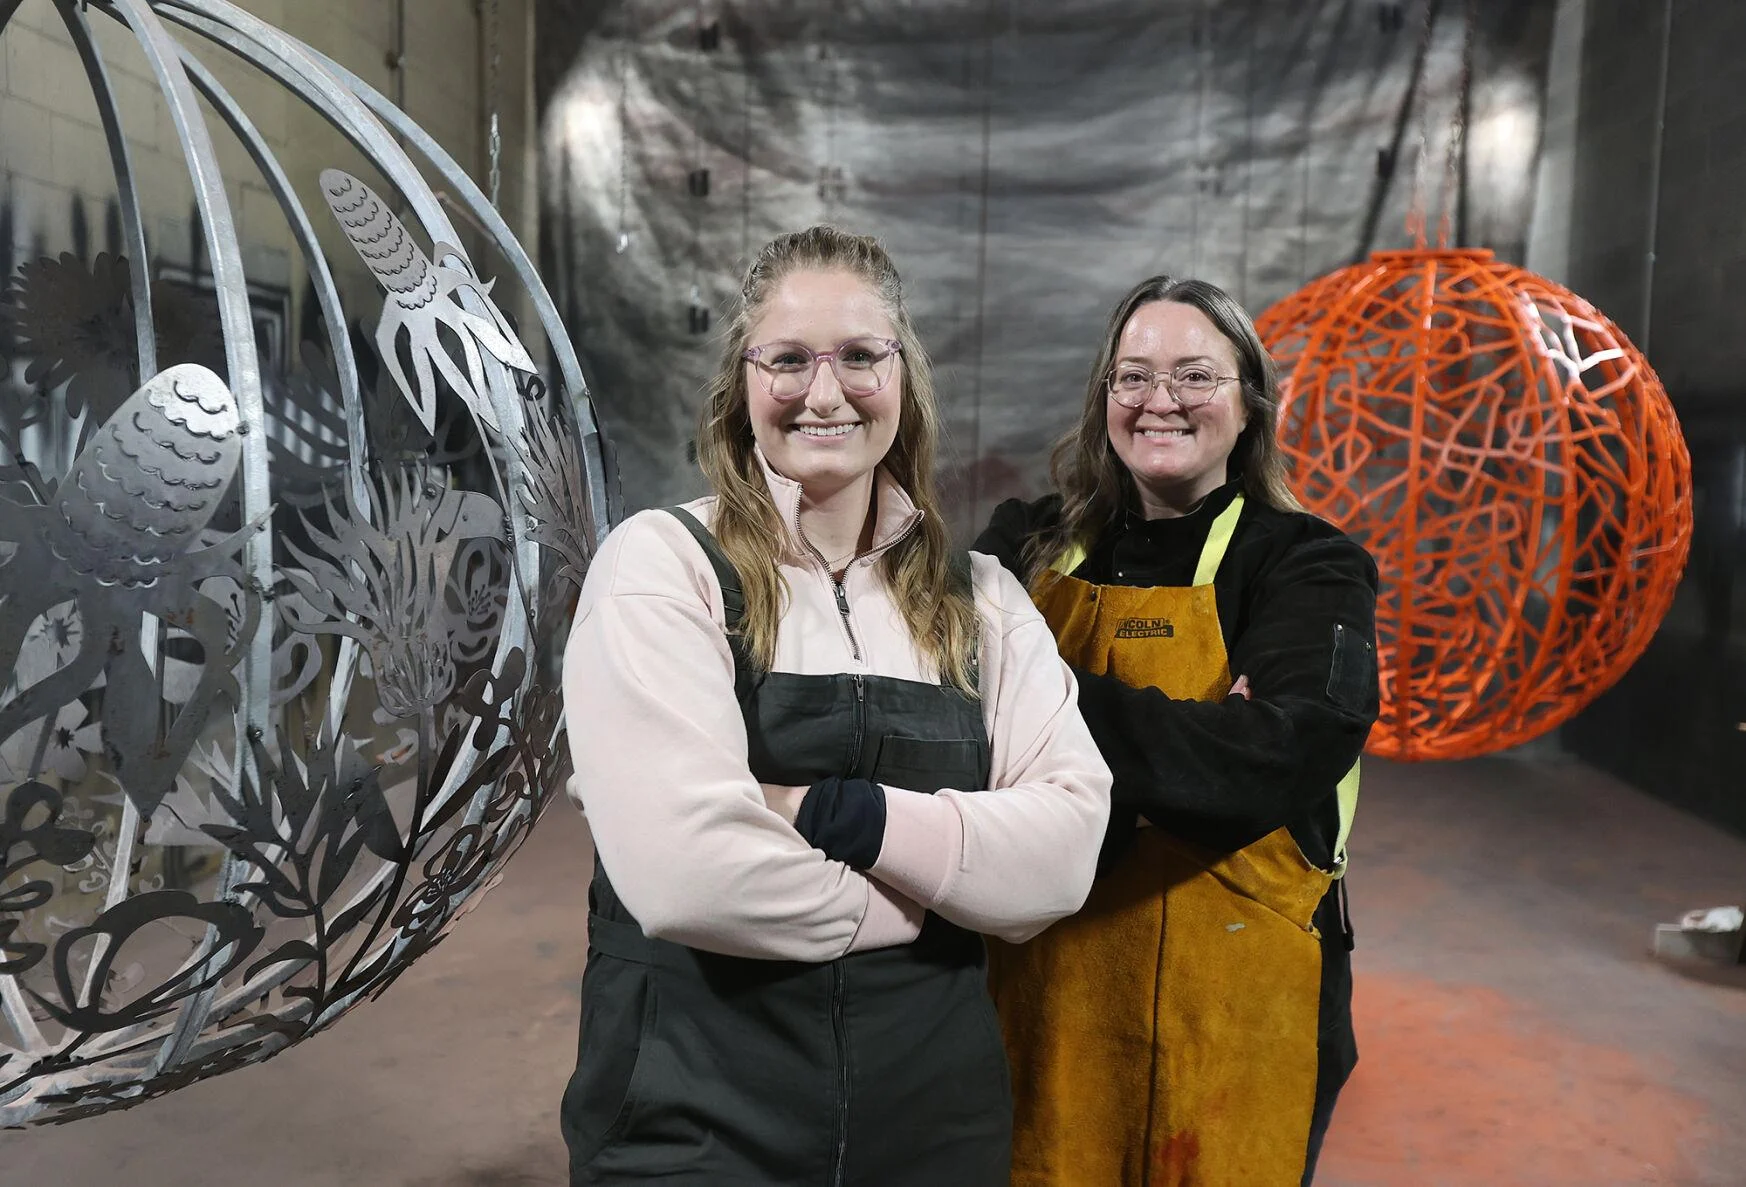 Texas Artists Morgan Eying and Andrea La Valleur-Purvis each made 3 Sculptures for the City of Waco Public Art Project in 2023. Photo Credit: Jerry Larson, Waco Tribune-Herald